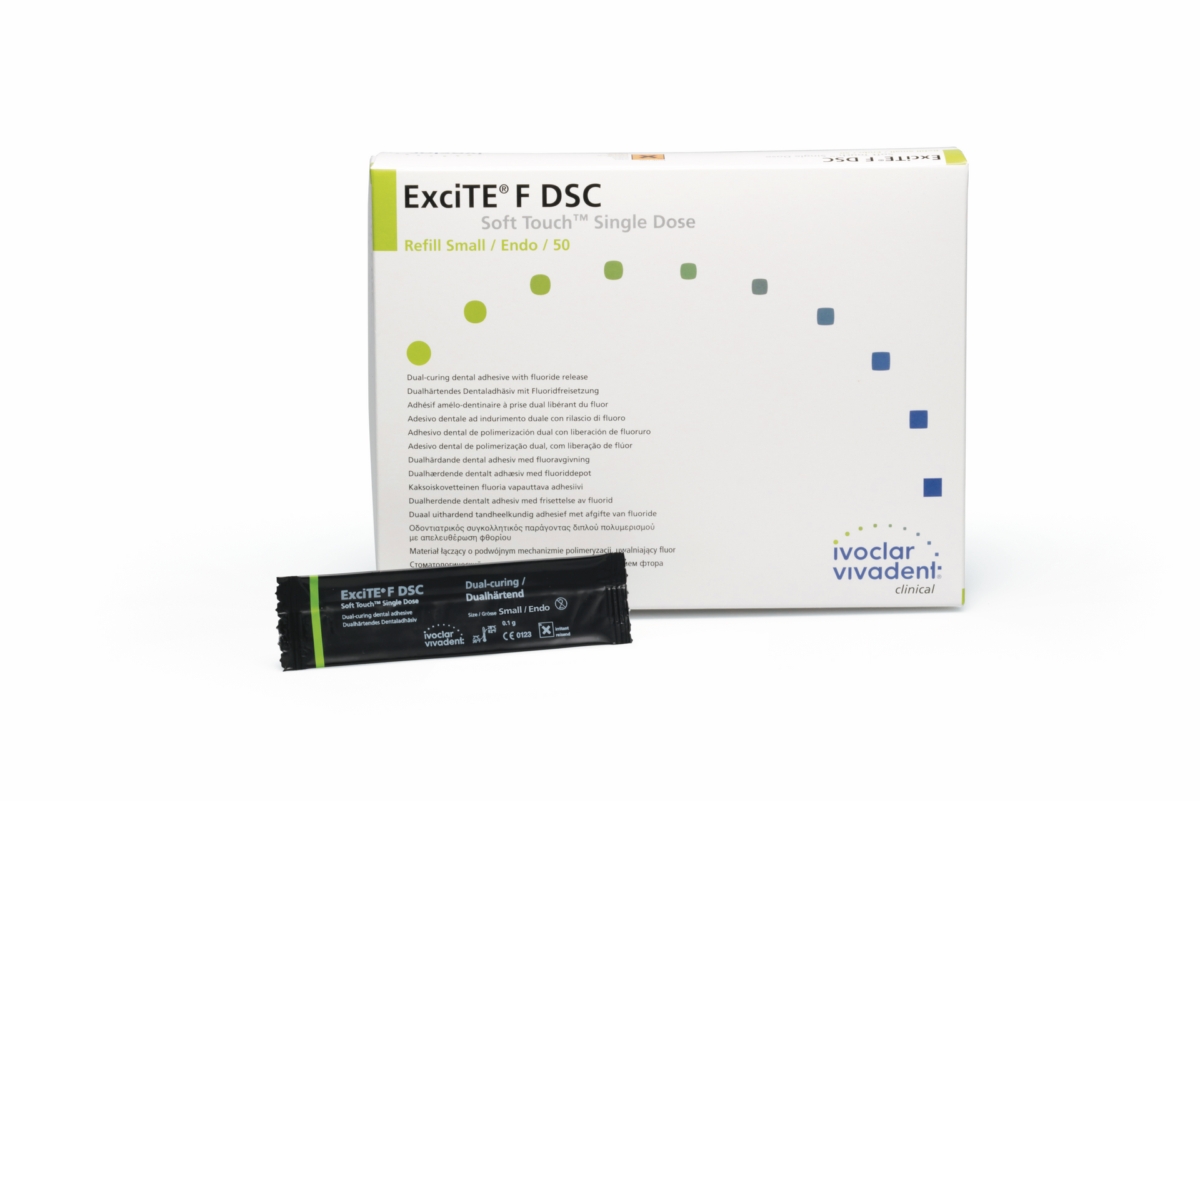 EXCITE DSC SING/DOSE SMALL 50x0,1GR